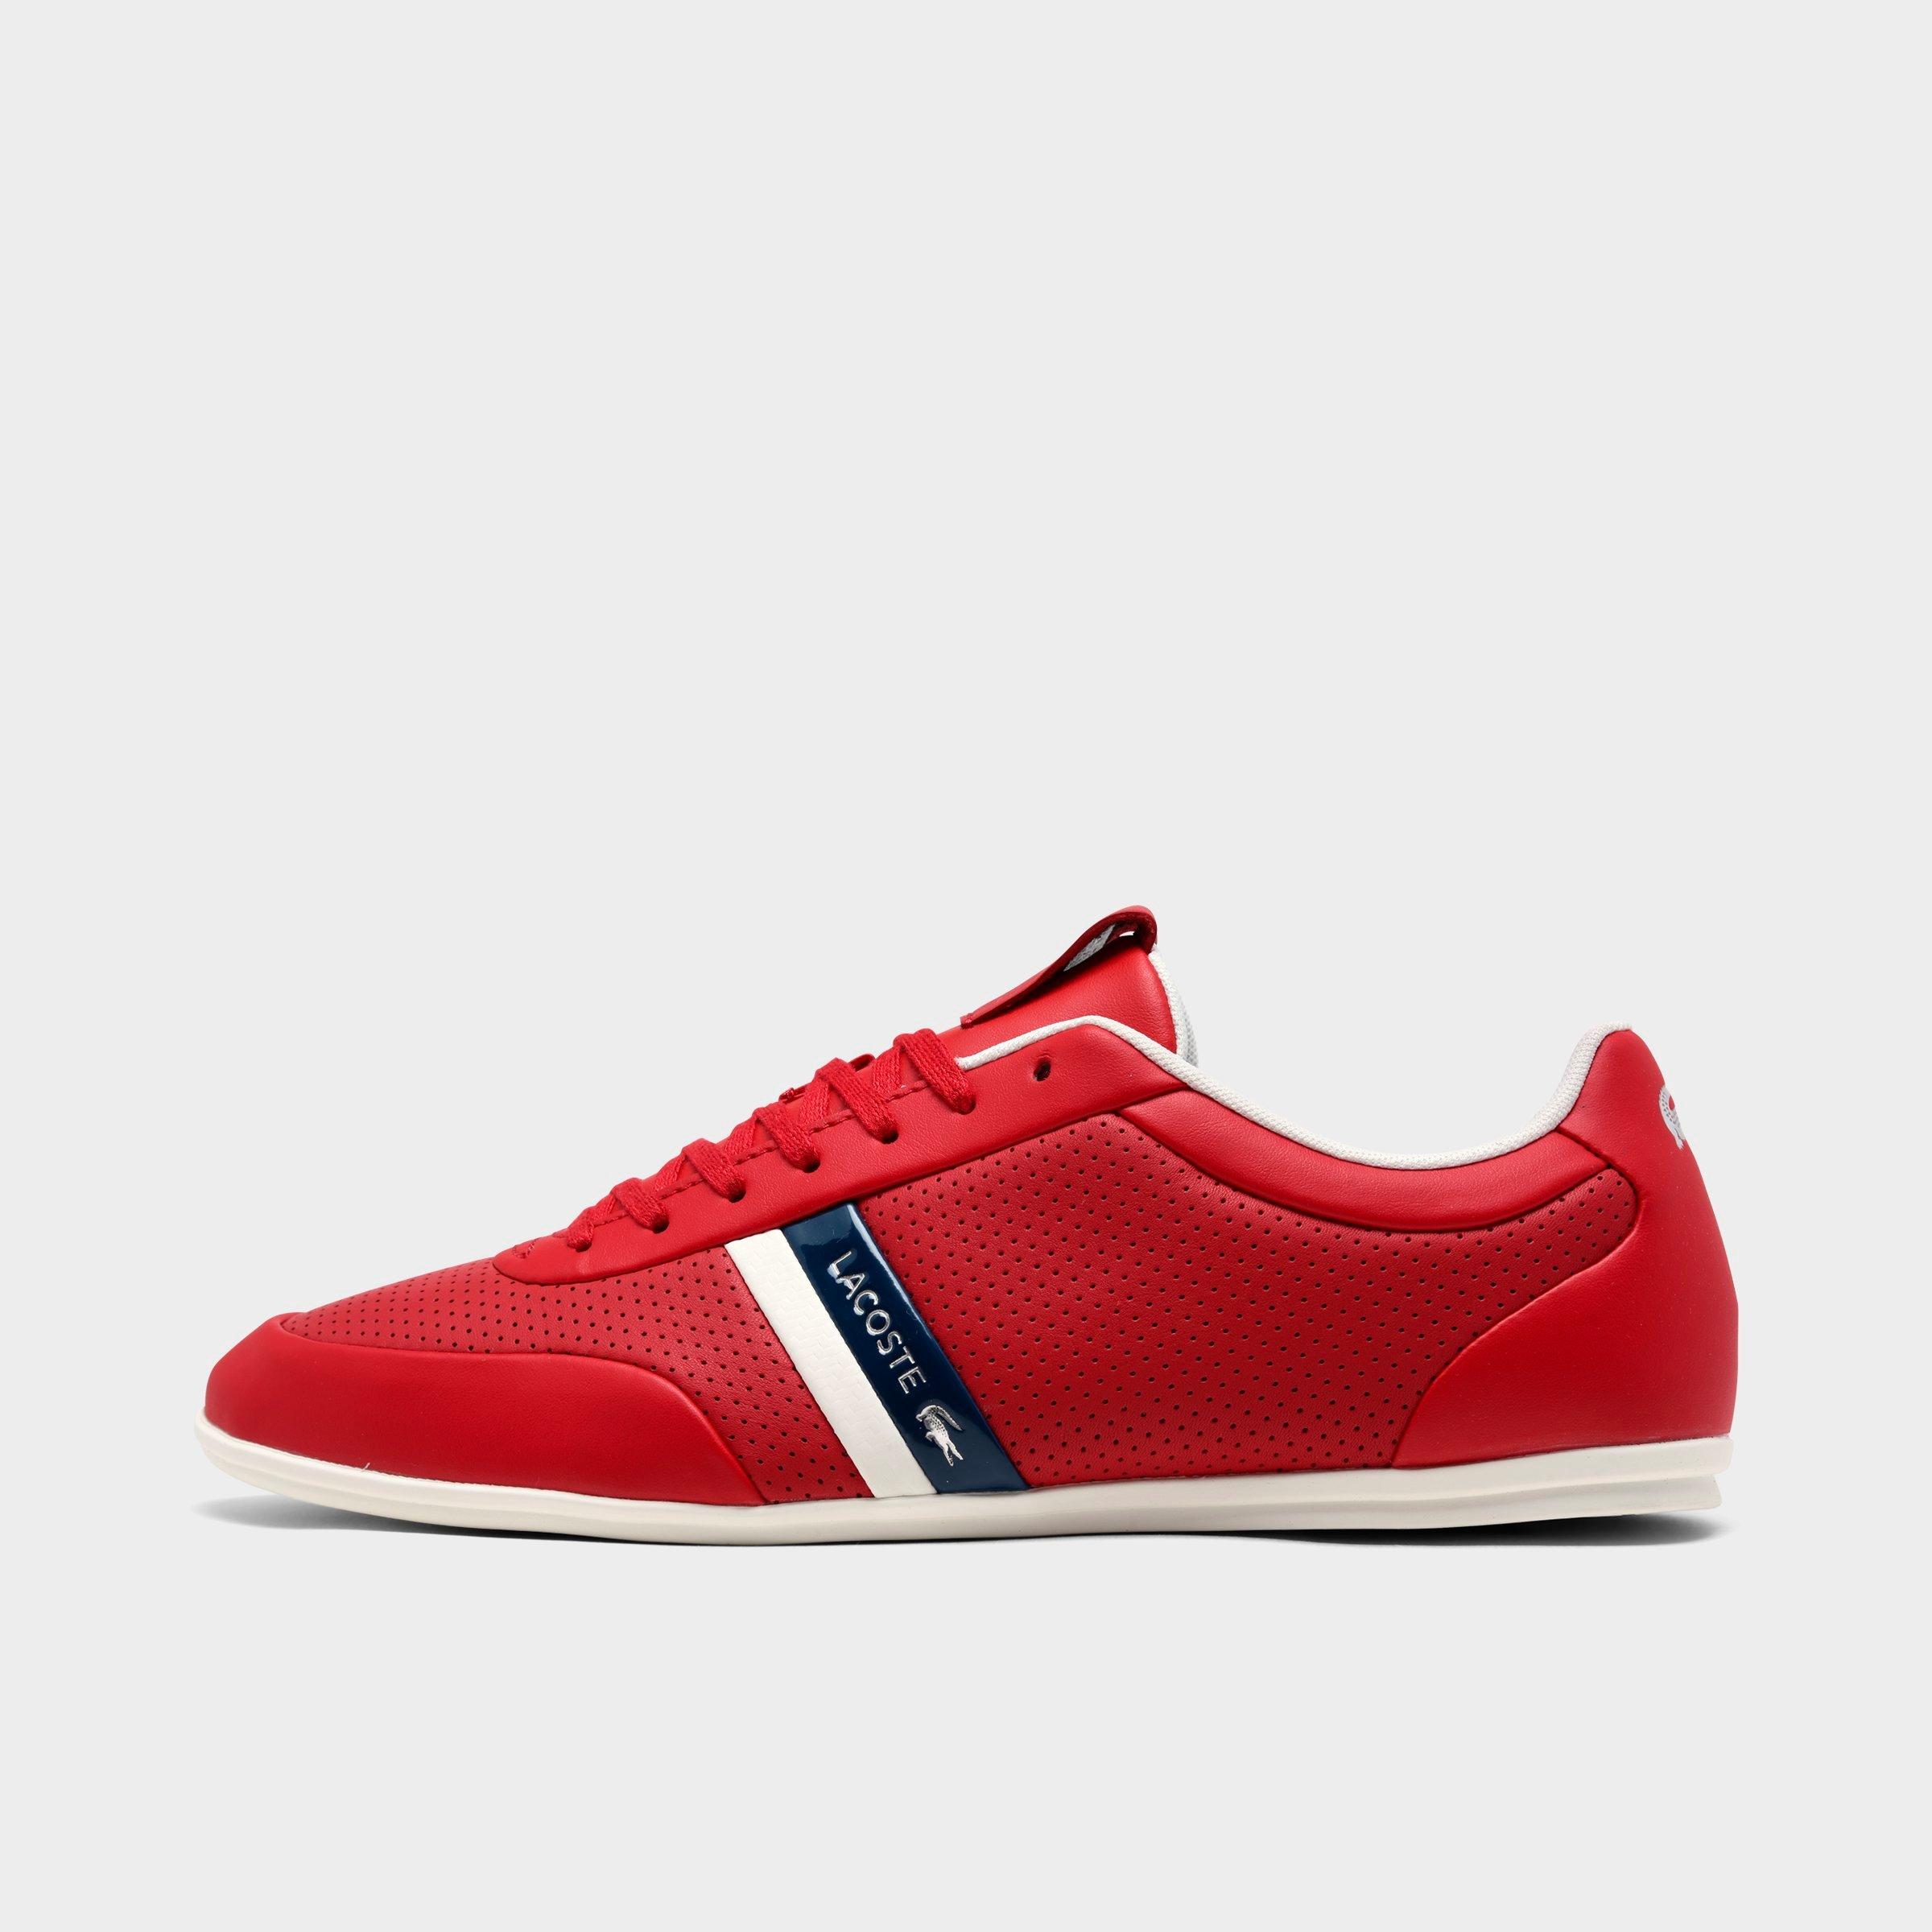 Lacoste Storda Casual Shoes| JD Sports